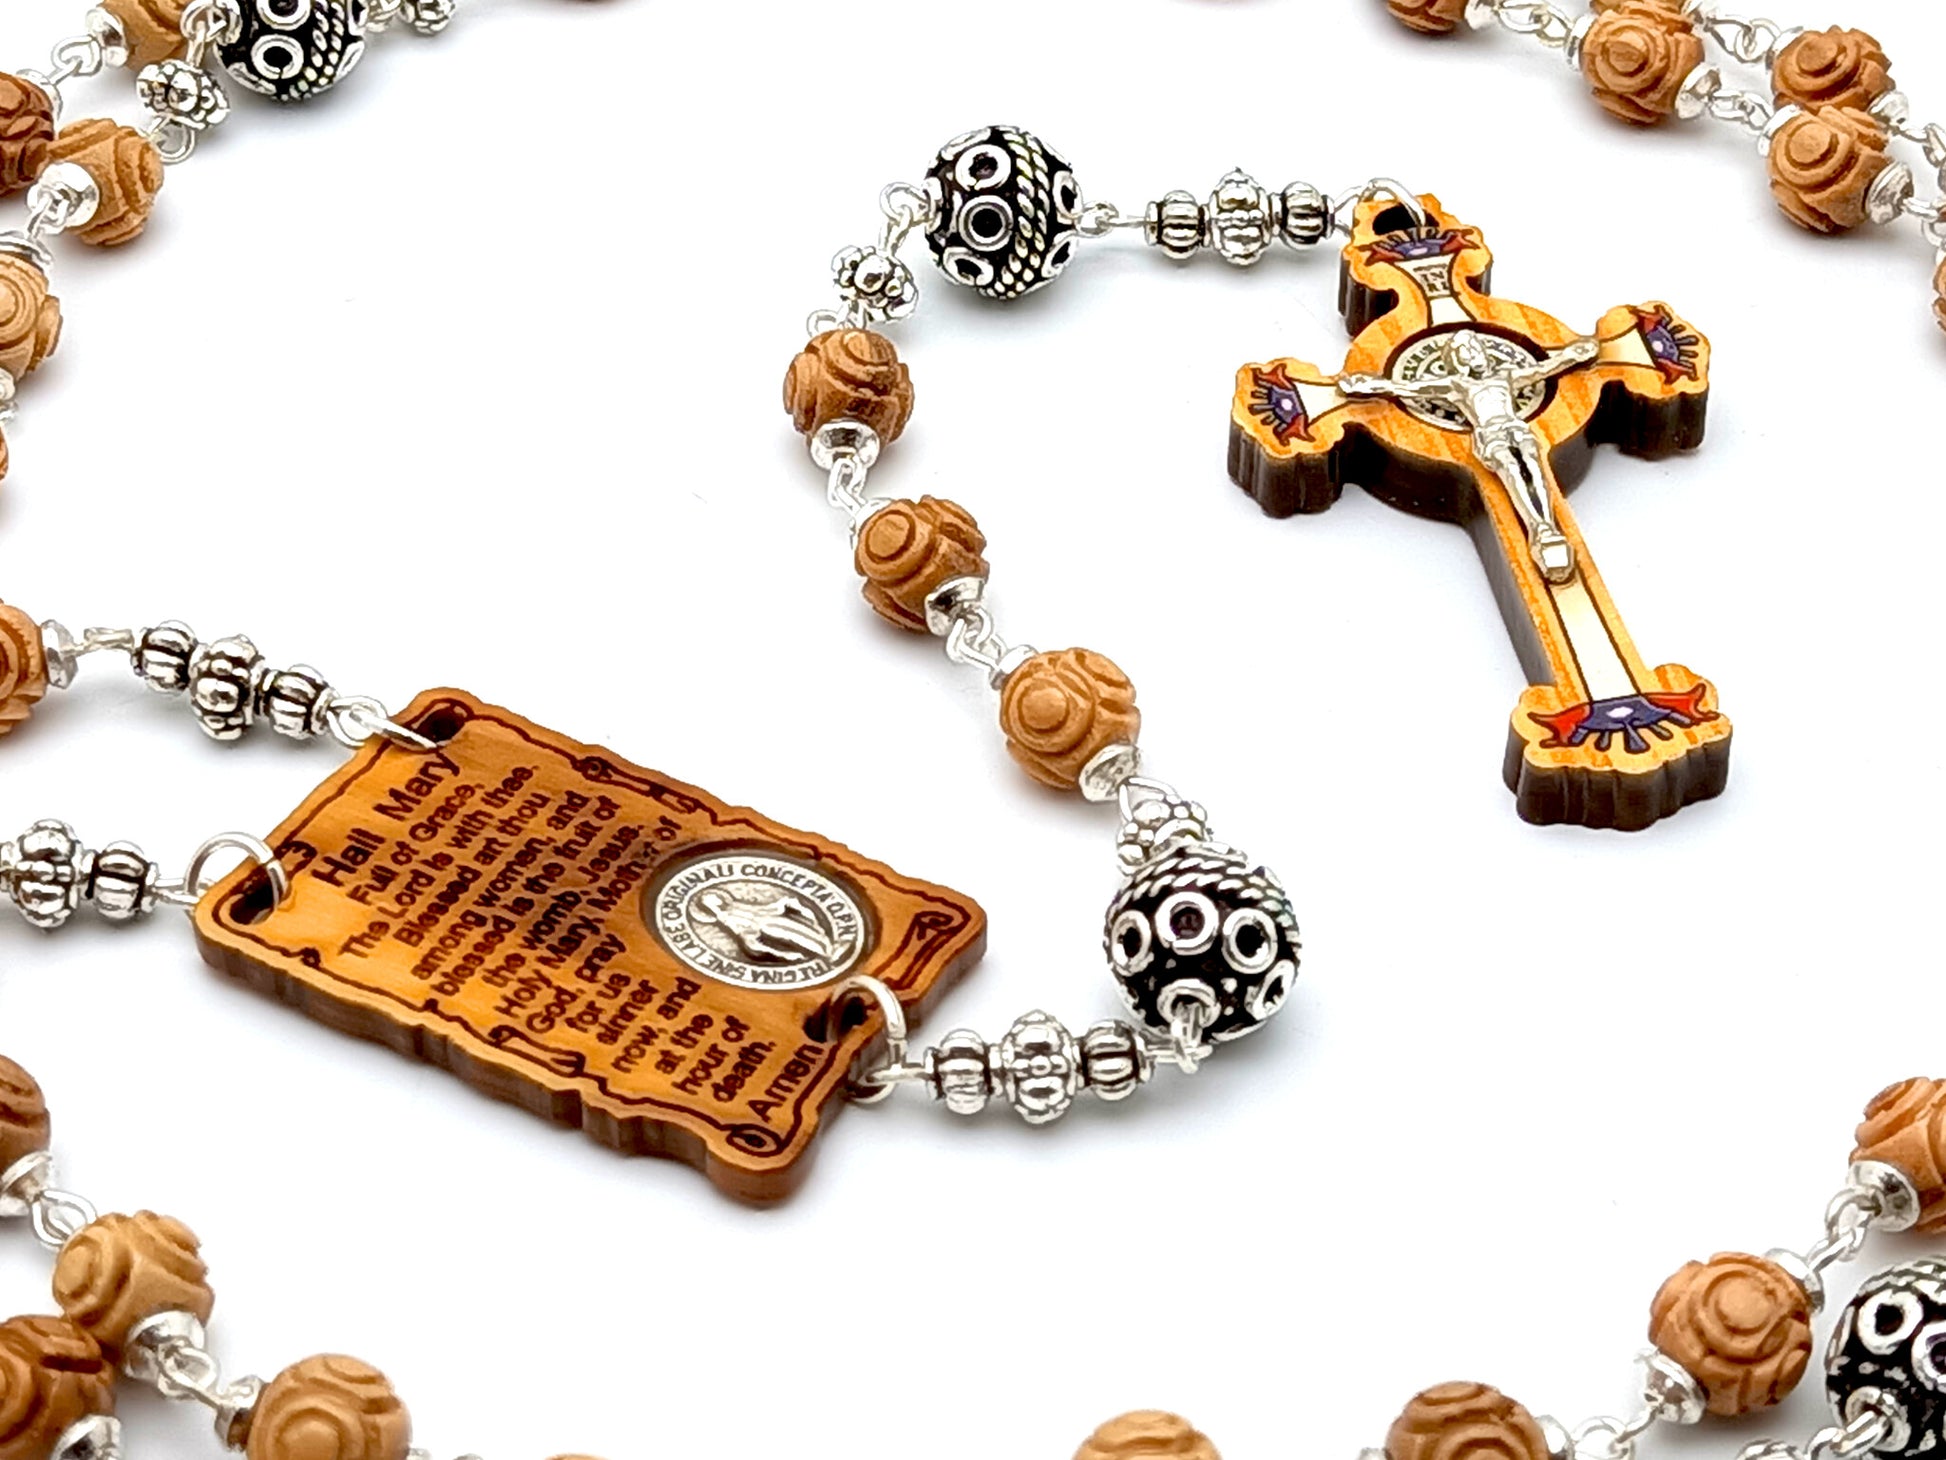 Miraculous Medal unique rosary beads with natural wood and silver beads, olive wood Saint Benedict crucifix and olive wood centre medal.